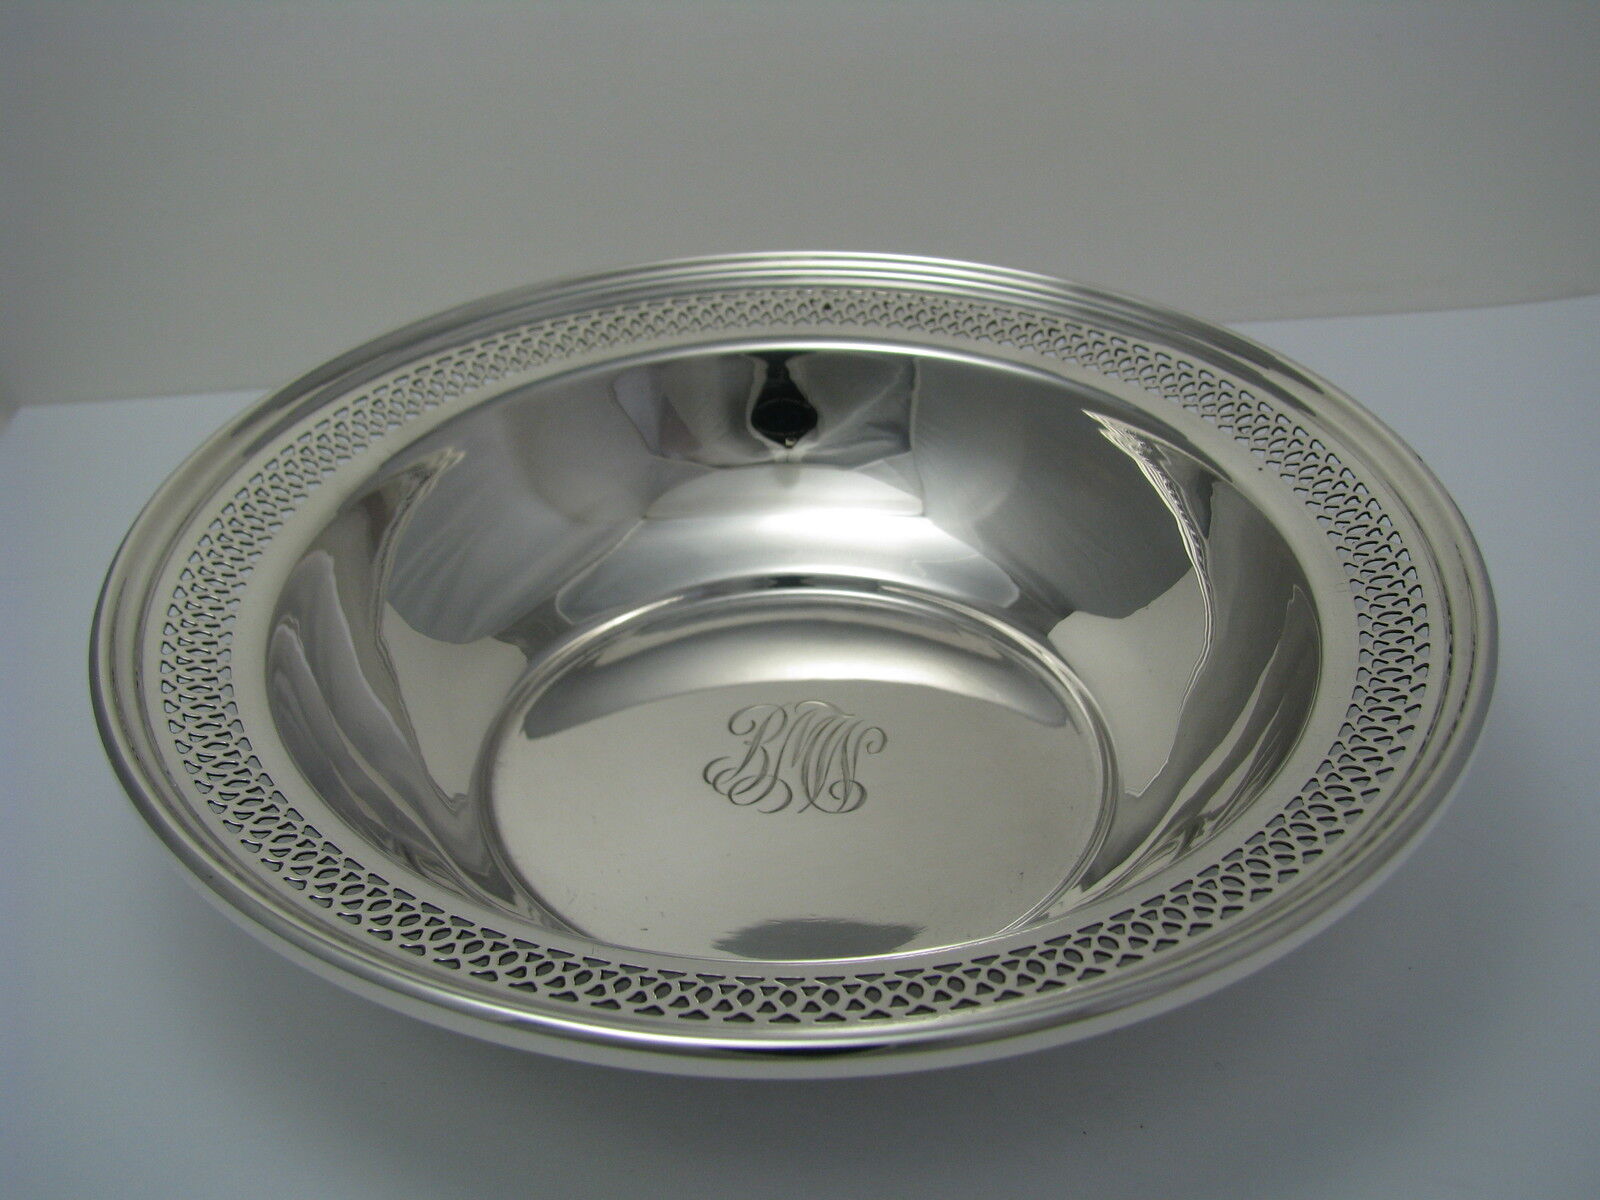 A SOLID STERLING SILVER BOWL DISH PLATE ca1900s Excellent Condition